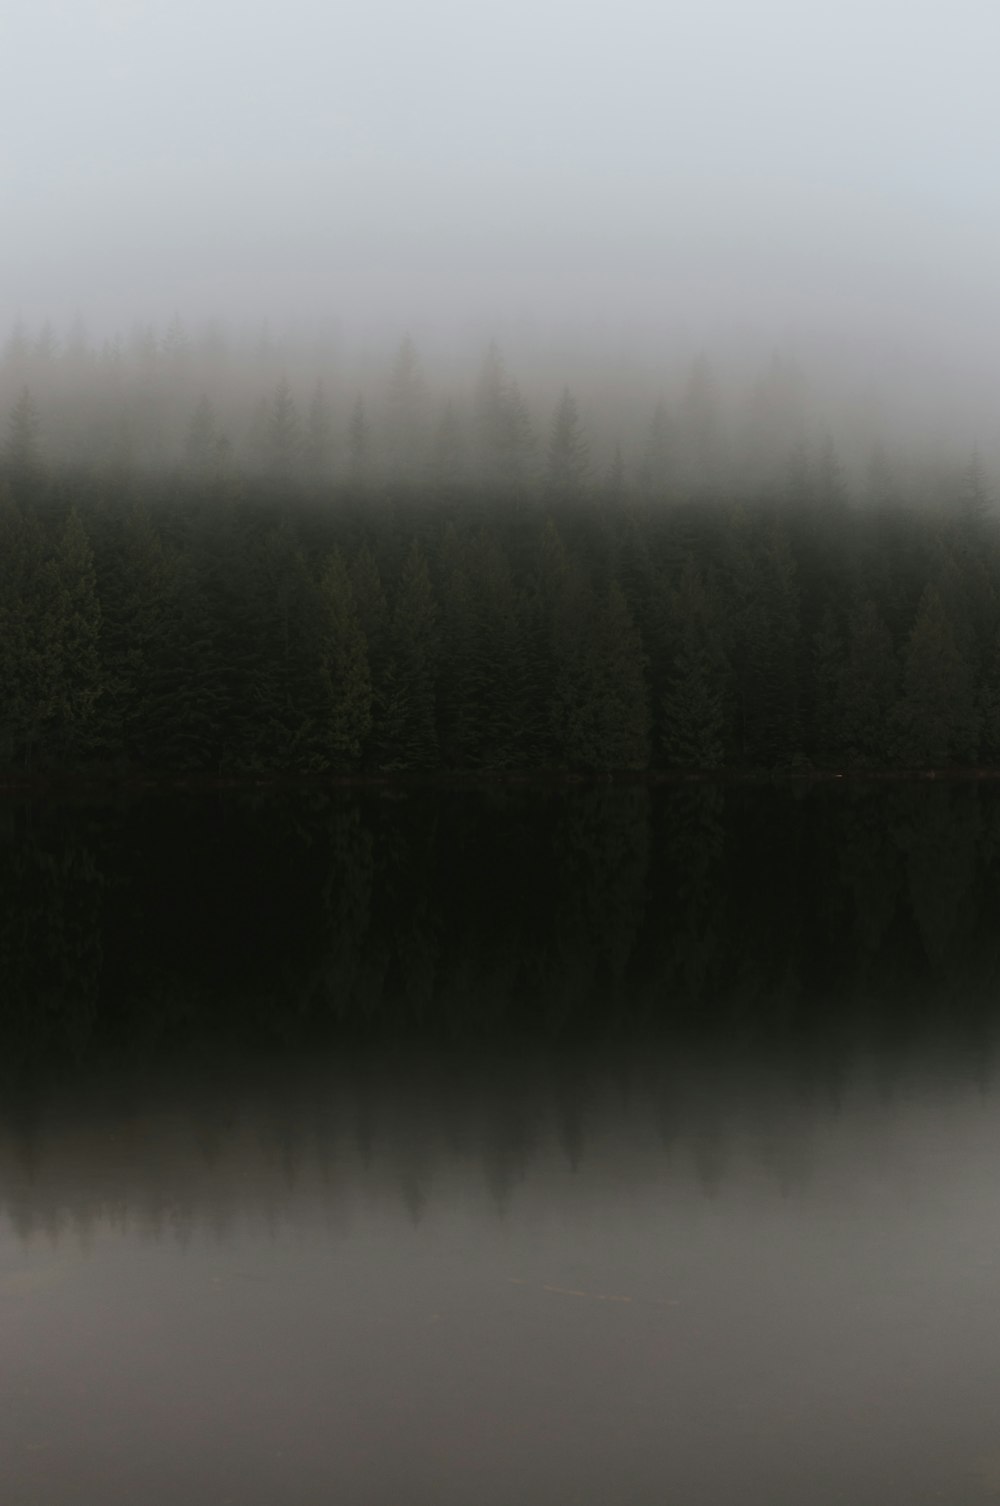 a foggy lake with trees in the background